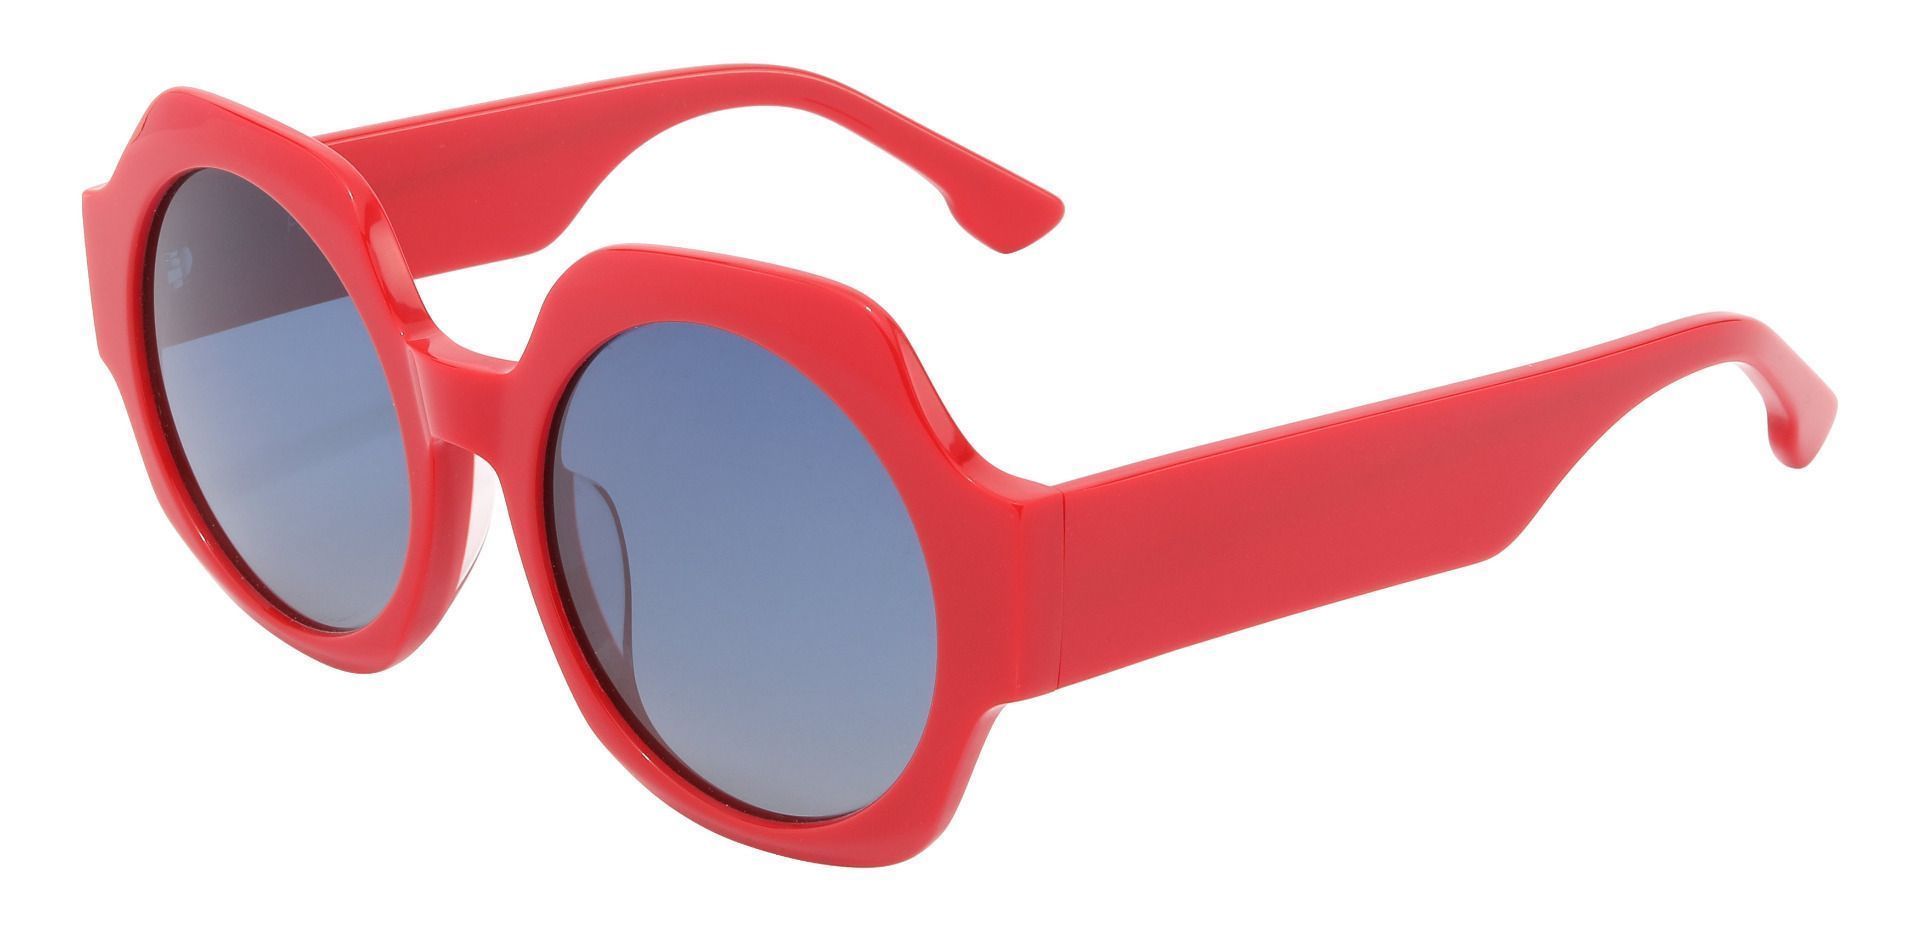 McDowell Round Red Non-Rx Sunglasses